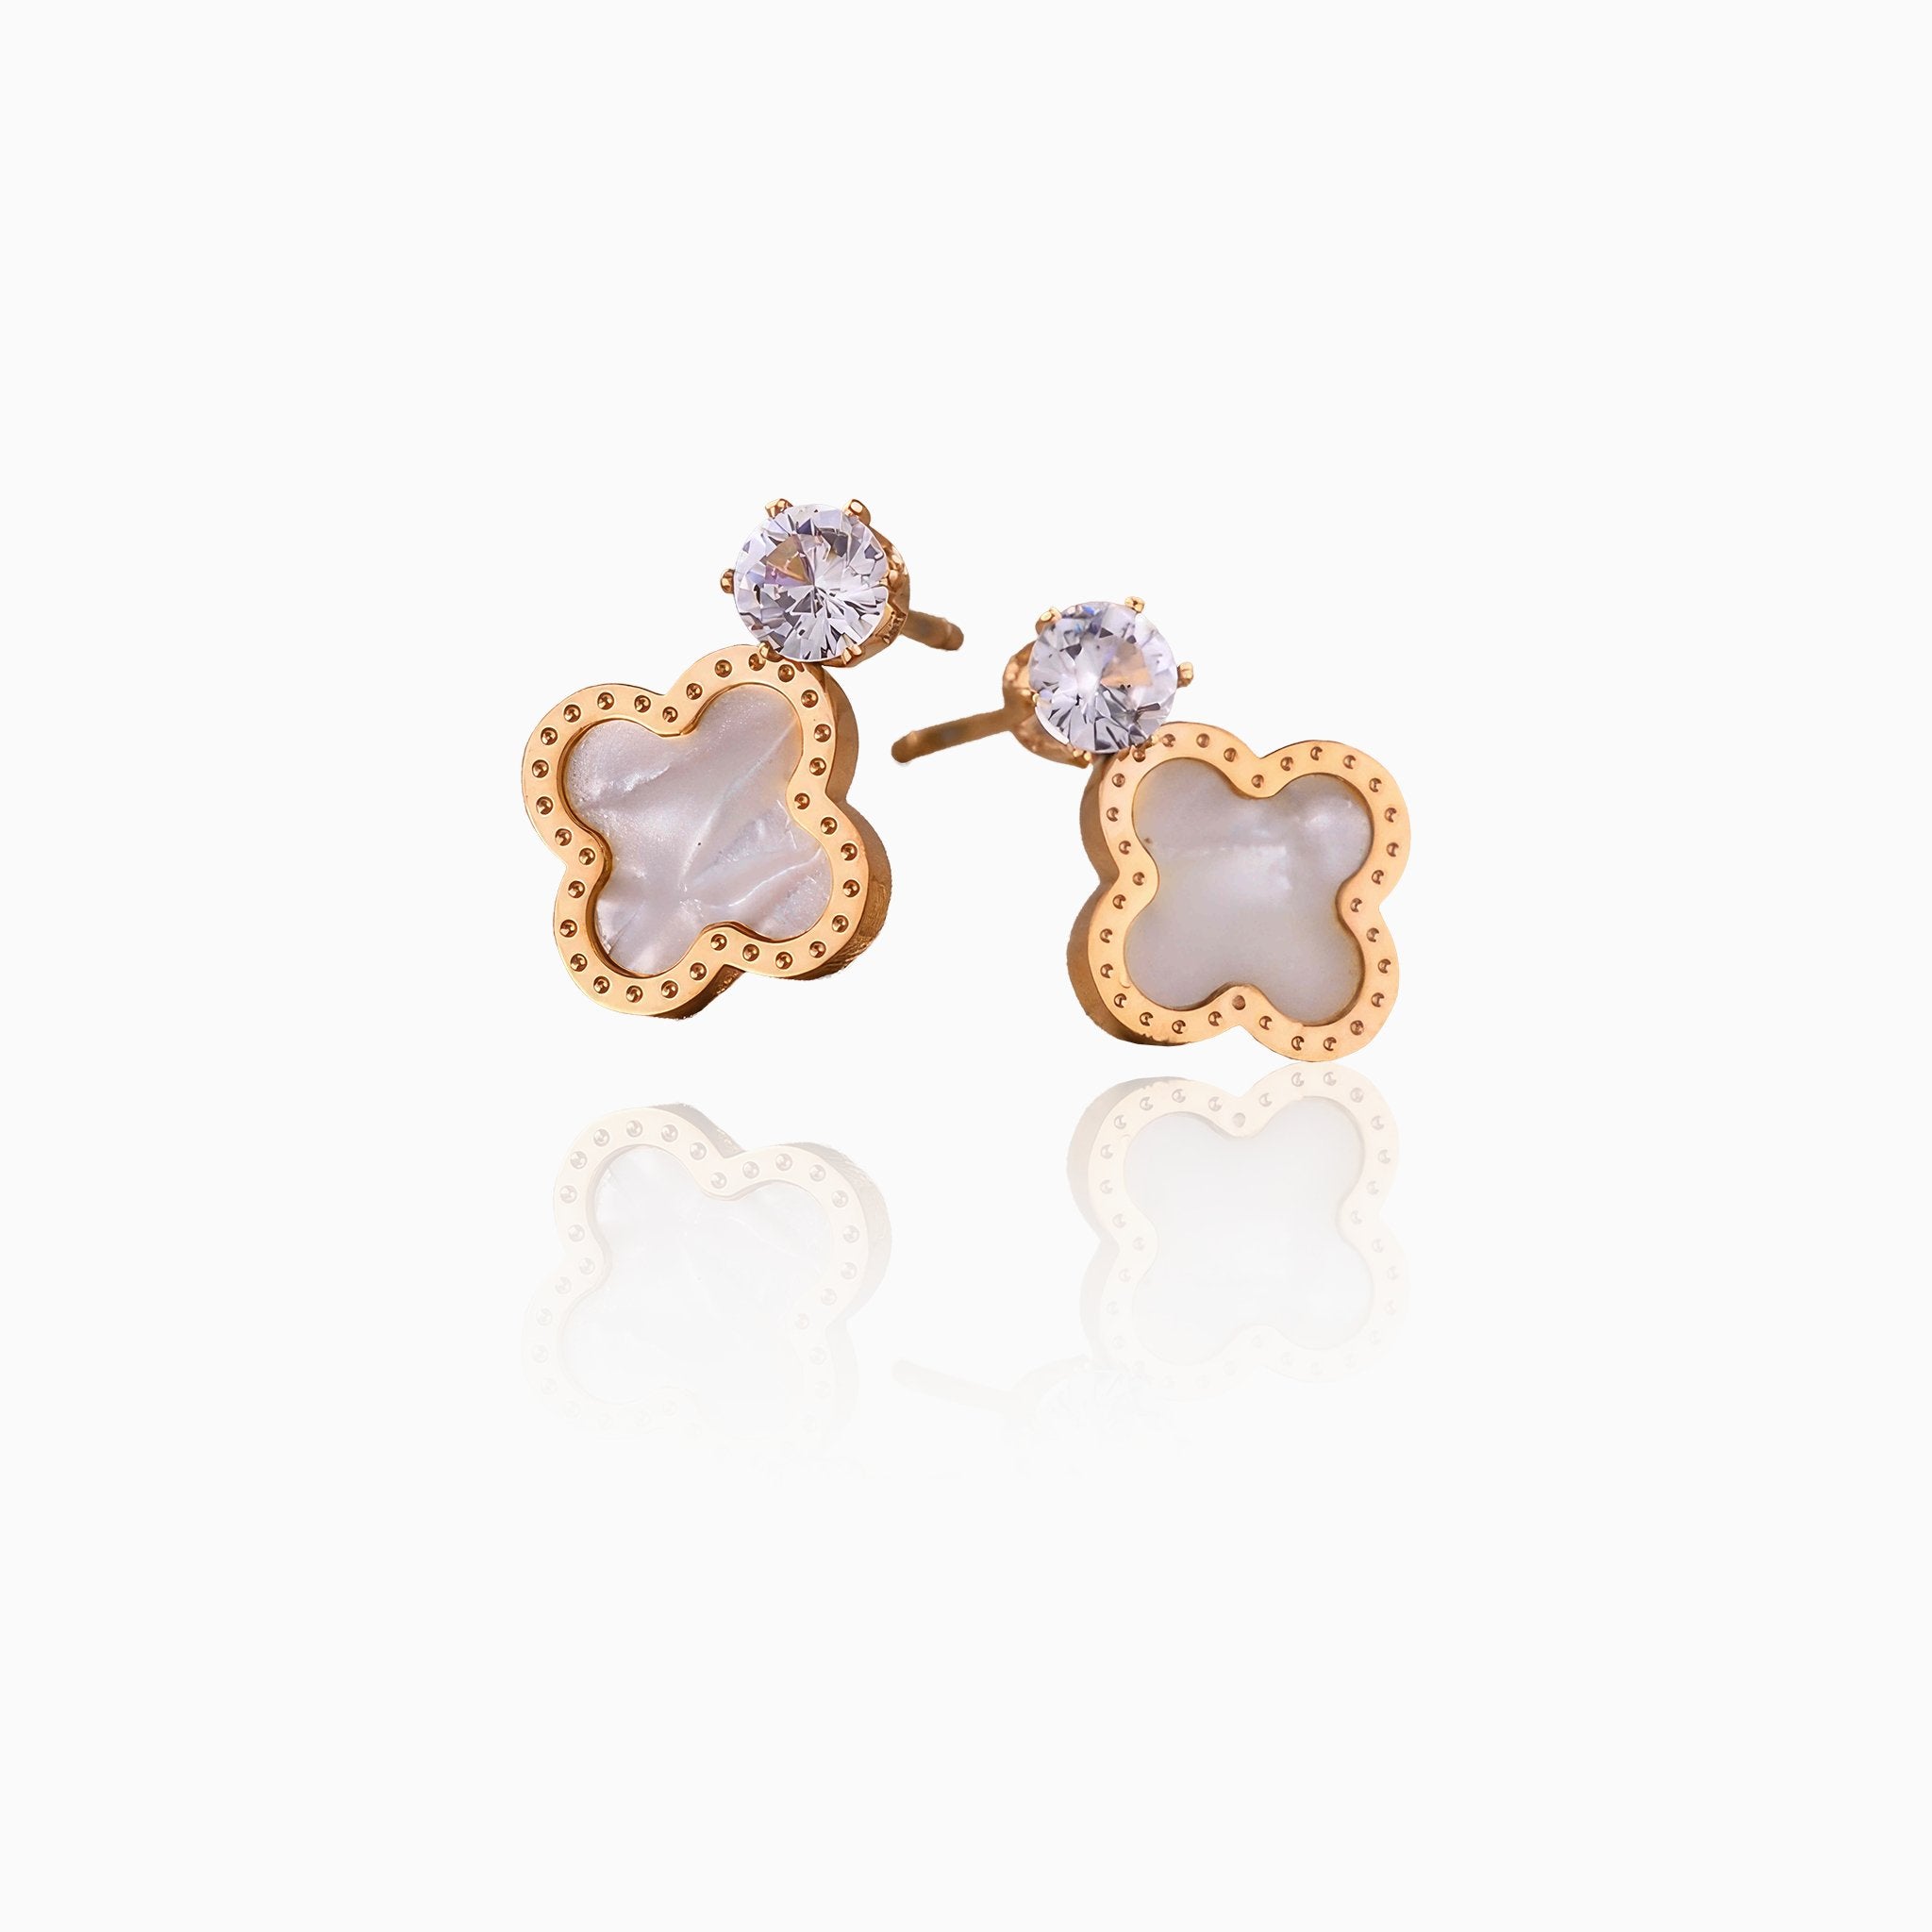 Four-Leaf Clover Earrings - Nobbier - Earrings - 18K Gold And Titanium PVD Coated Jewelry